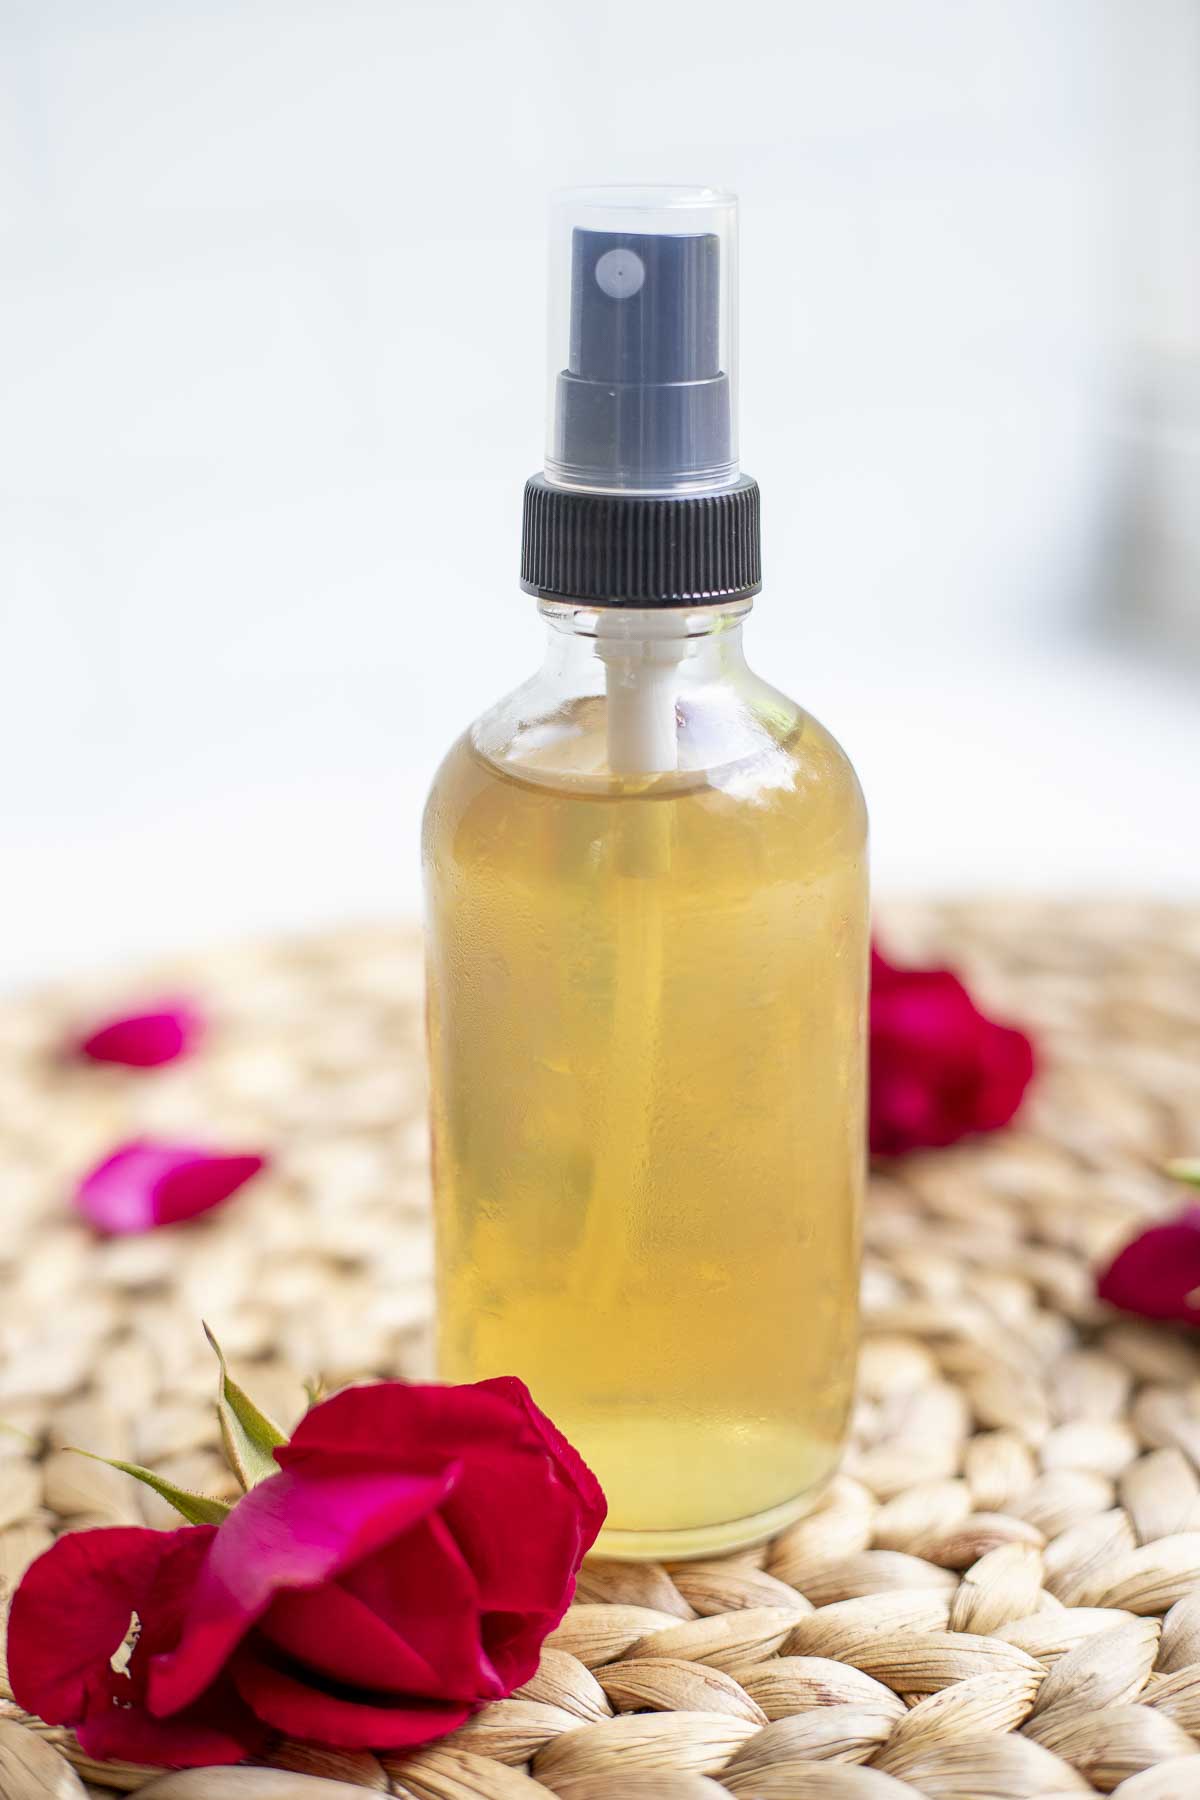 How To Make Rose Water